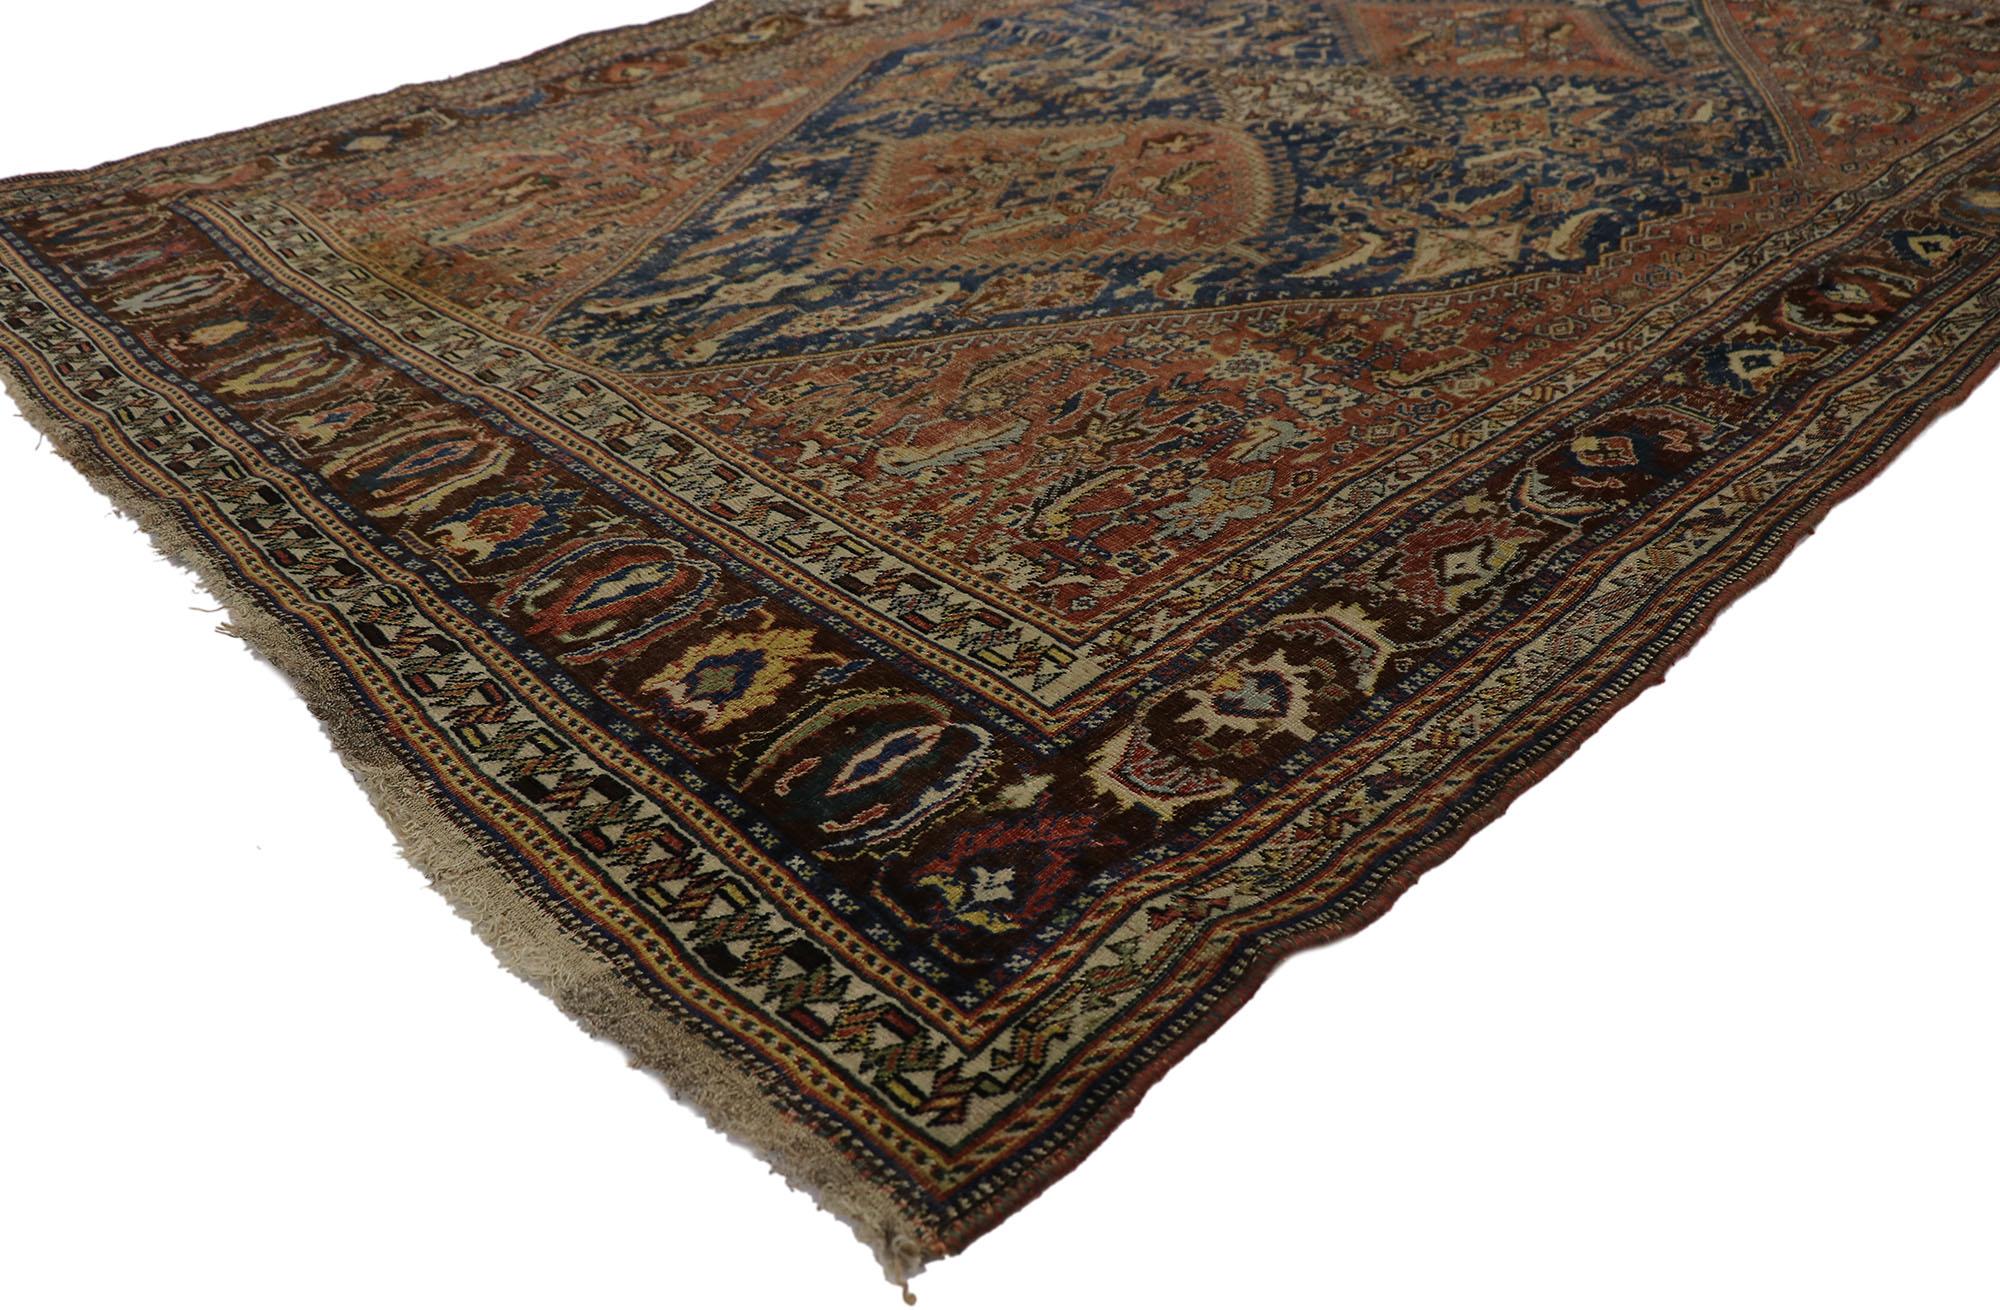 21696 Antique Persian Qashqai Rug 05'00 x 07'06. Rendered in variegated shades of rust, brick red, terra cotta, navy blue, brown, sienna, tan, taupe, ecru, sand, sky blue, oxblood red, and green with other accent colors. 

Distressed. Desirable